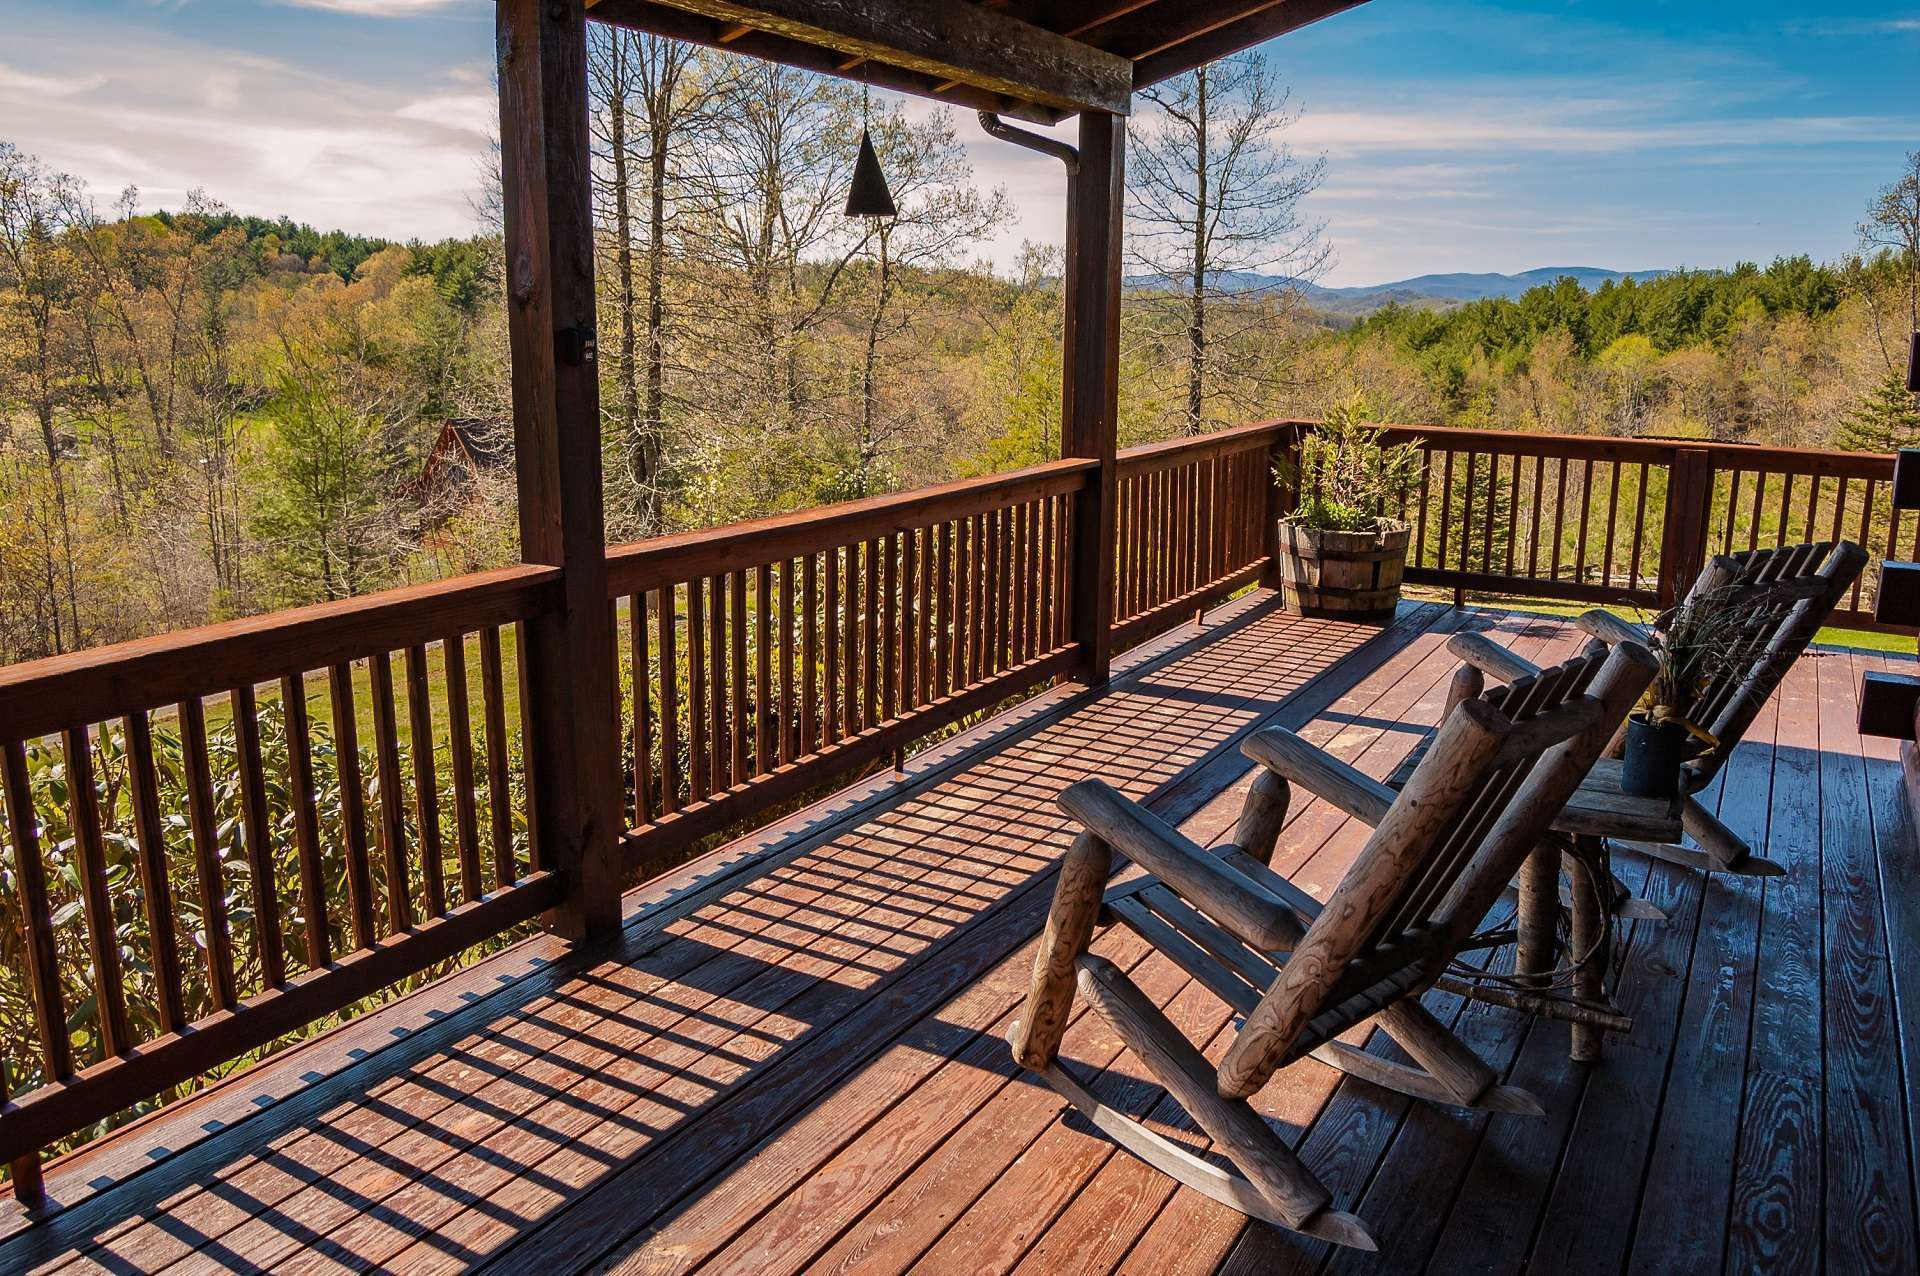 With two covered porches and vast decking, this cabin offers abundant space for outdoor dining, entertaining, or...